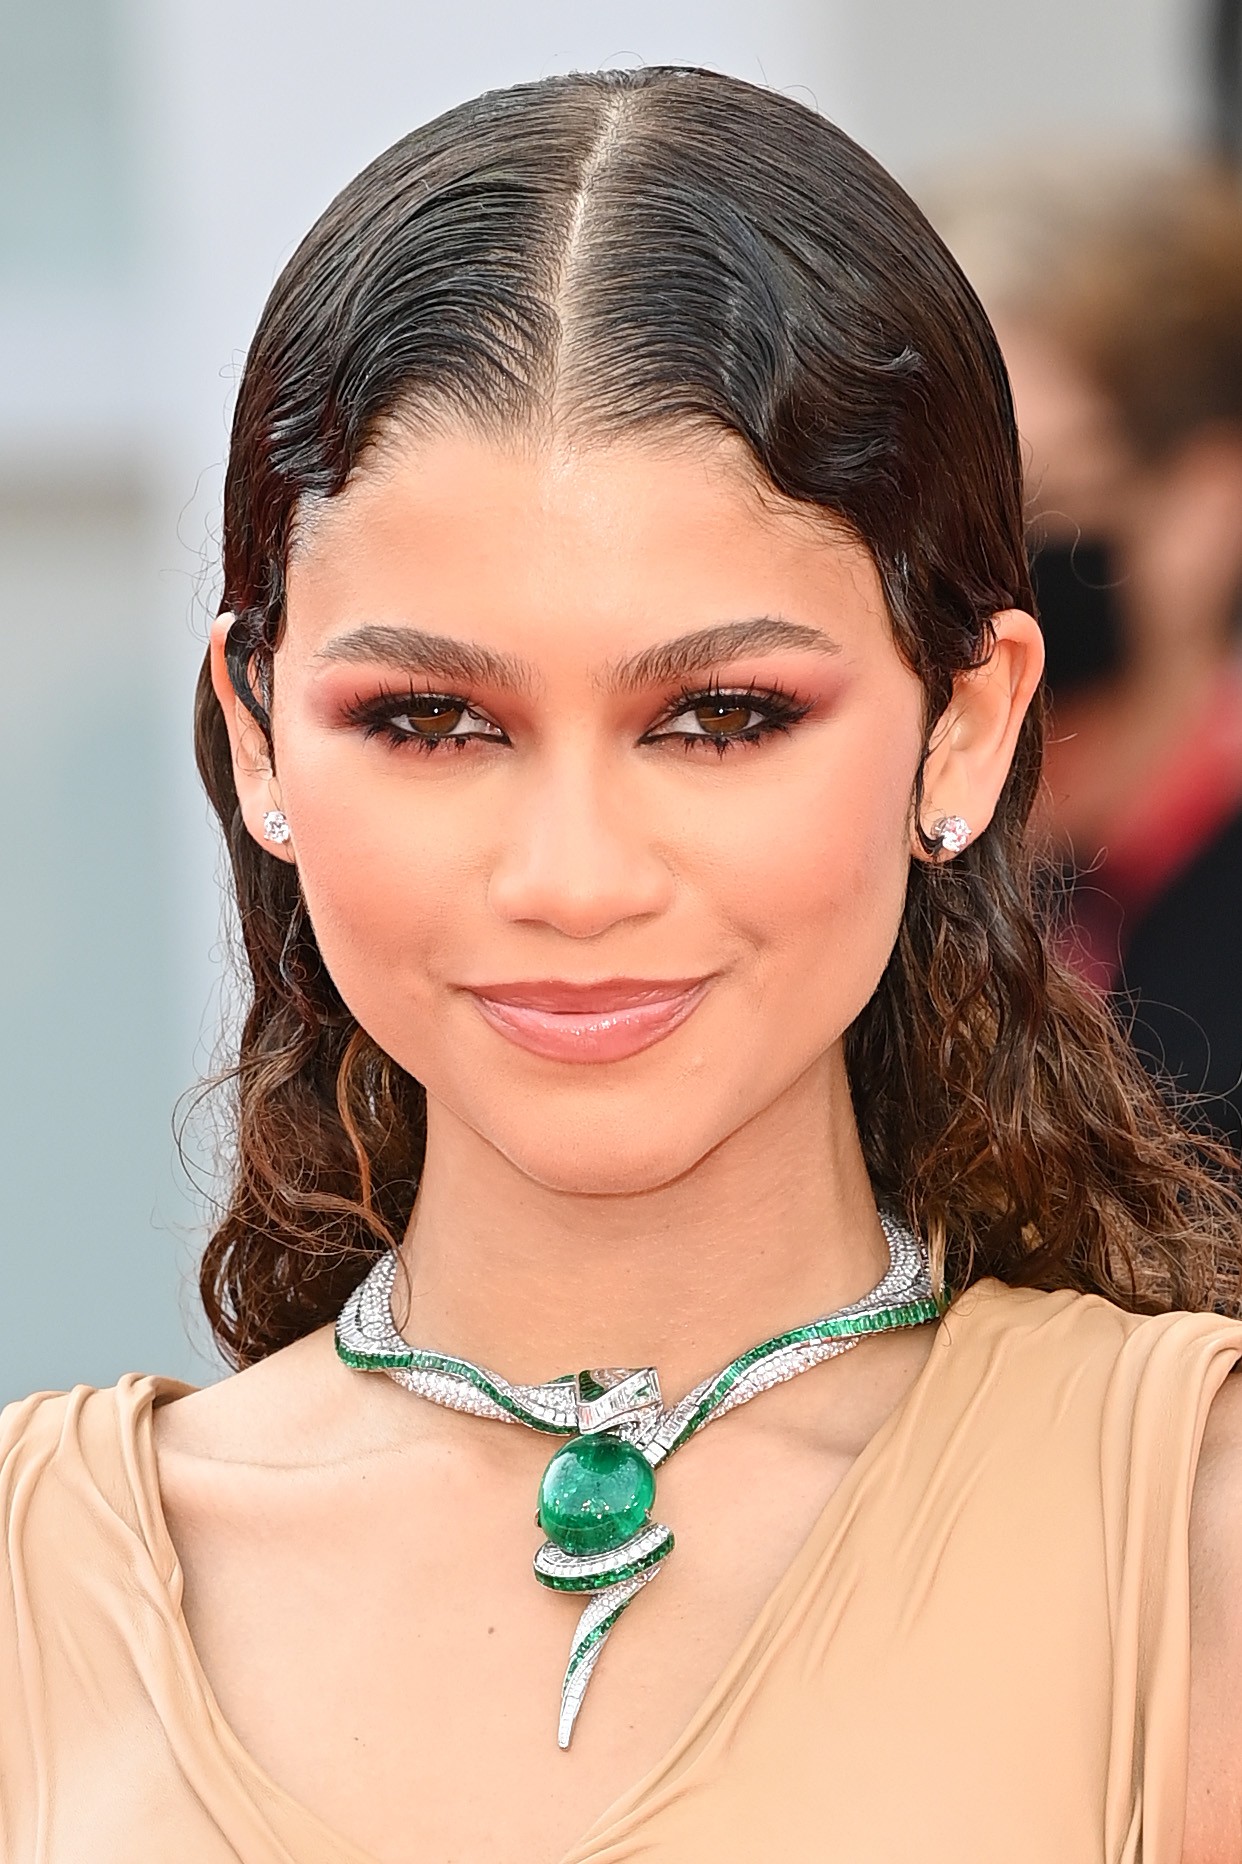 VENICE, ITALY - SEPTEMBER 03: Zendaya attends the red carpet of the movie "Dune" during the 78th Venice International Film Festival on September 03, 2021 in Venice, Italy. (Photo by Daniele Venturelli/WireImage) (Foto: WireImage)